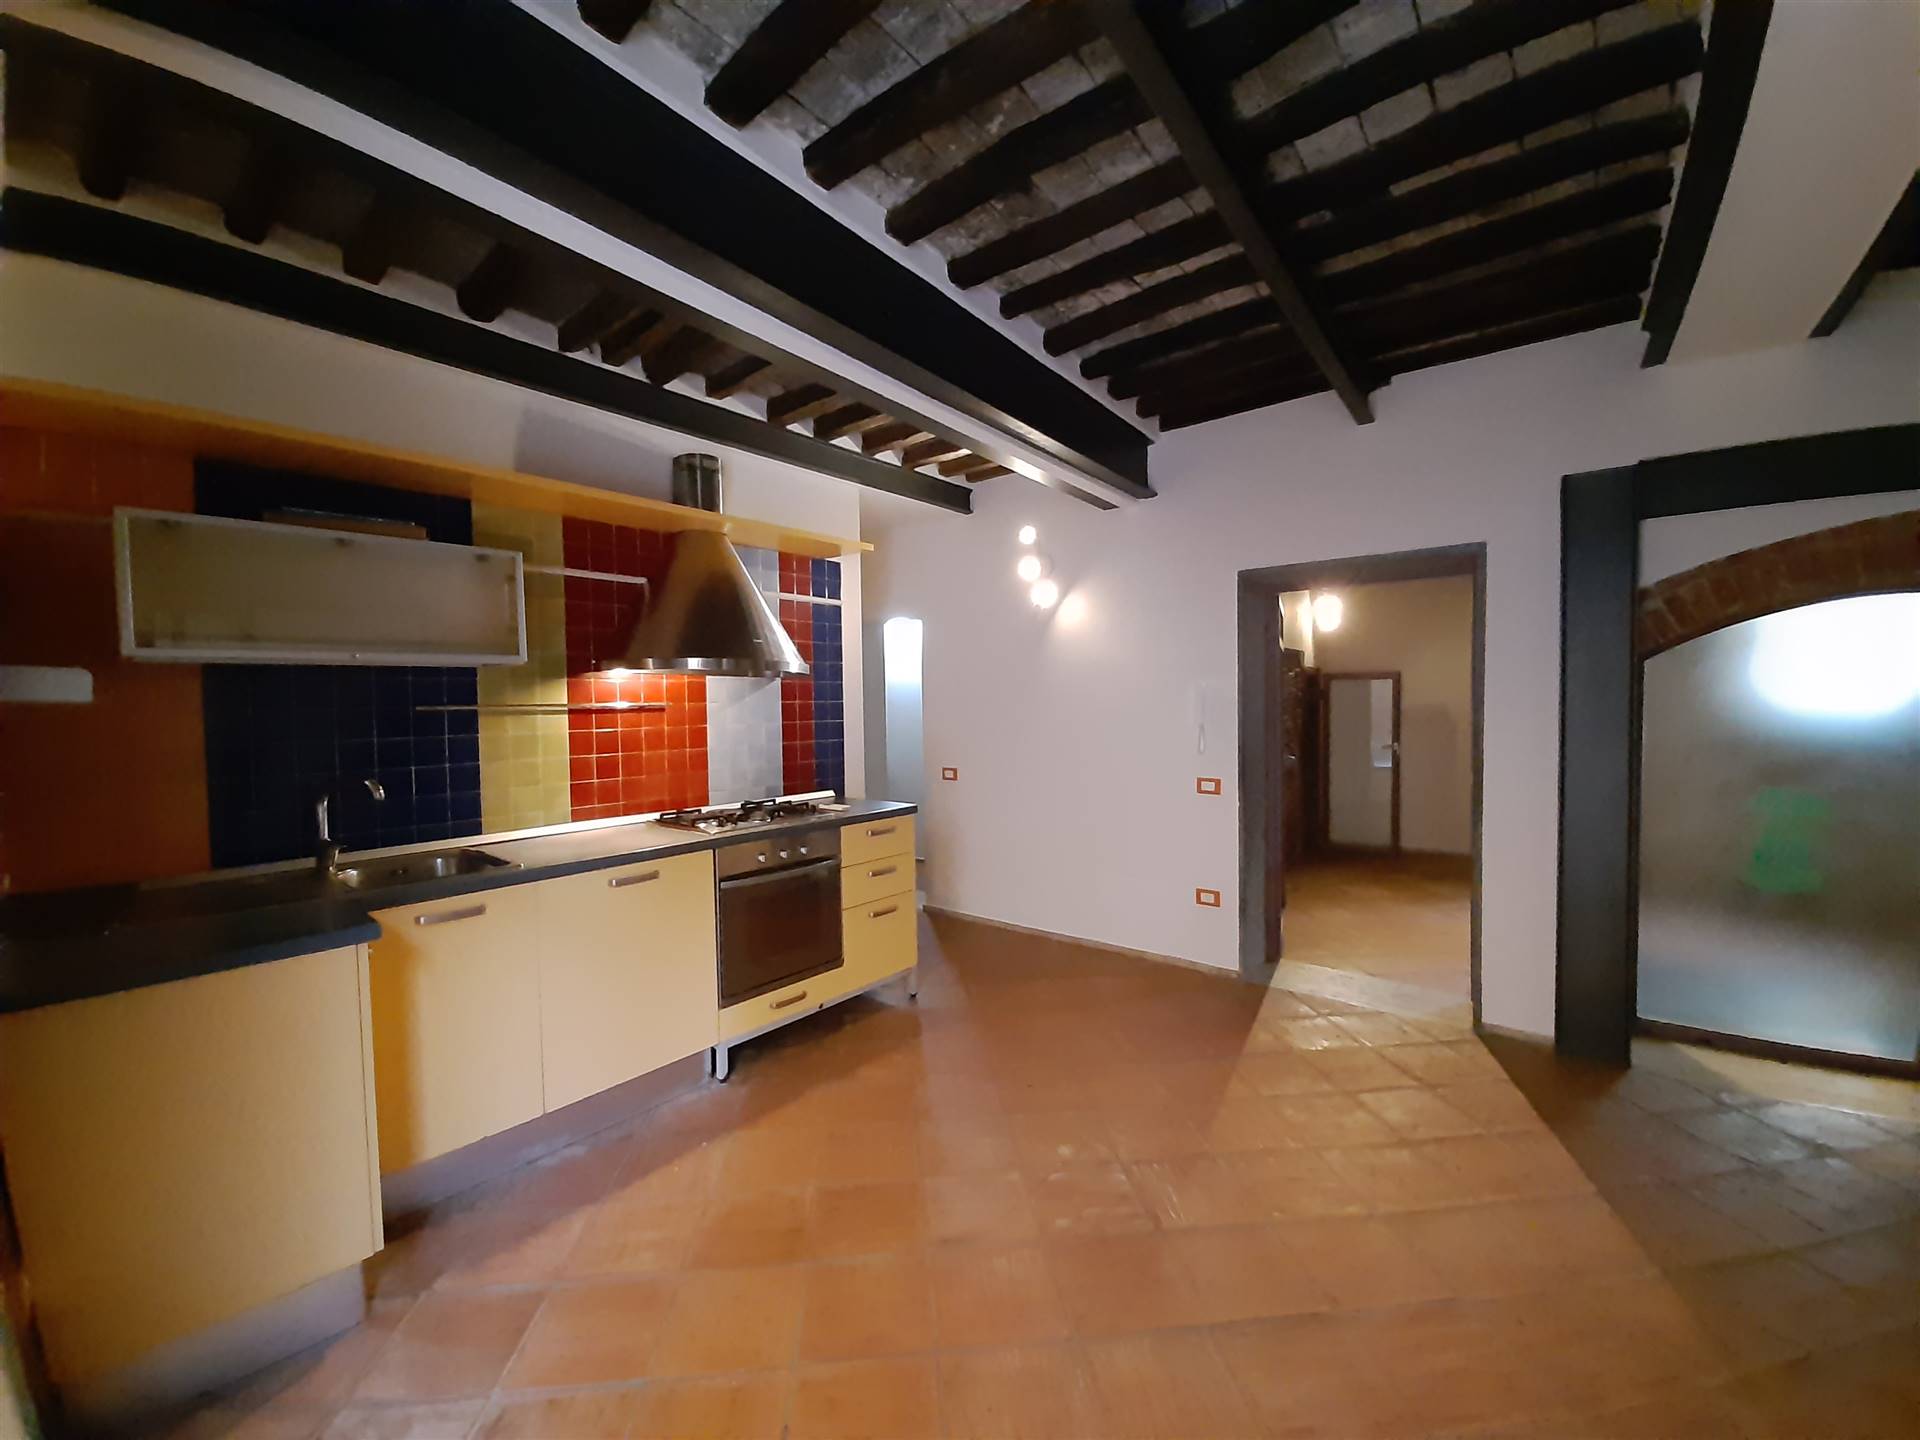 SAN MARTINO, PISA, Detached apartment for sale of 80 Sq. mt., Energetic class: G, Epi: 6,8 kwh/m2 year, placed at Ground on 3, composed by: 3 Rooms, 